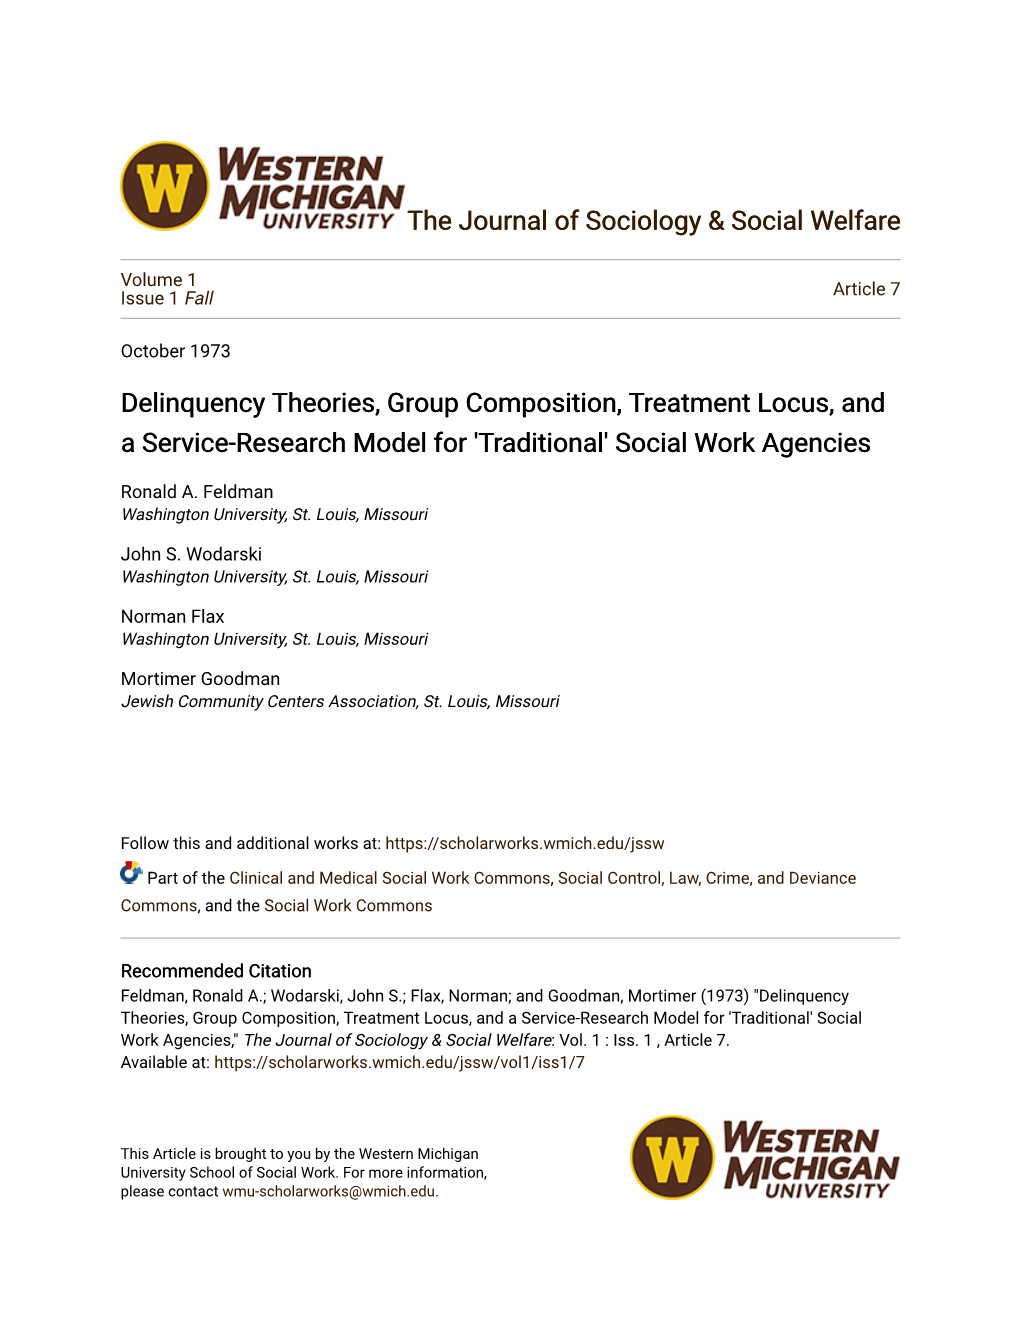 Delinquency Theories, Group Composition, Treatment Locus, and a Service-Research Model for 'Traditional' Social Work Agencies